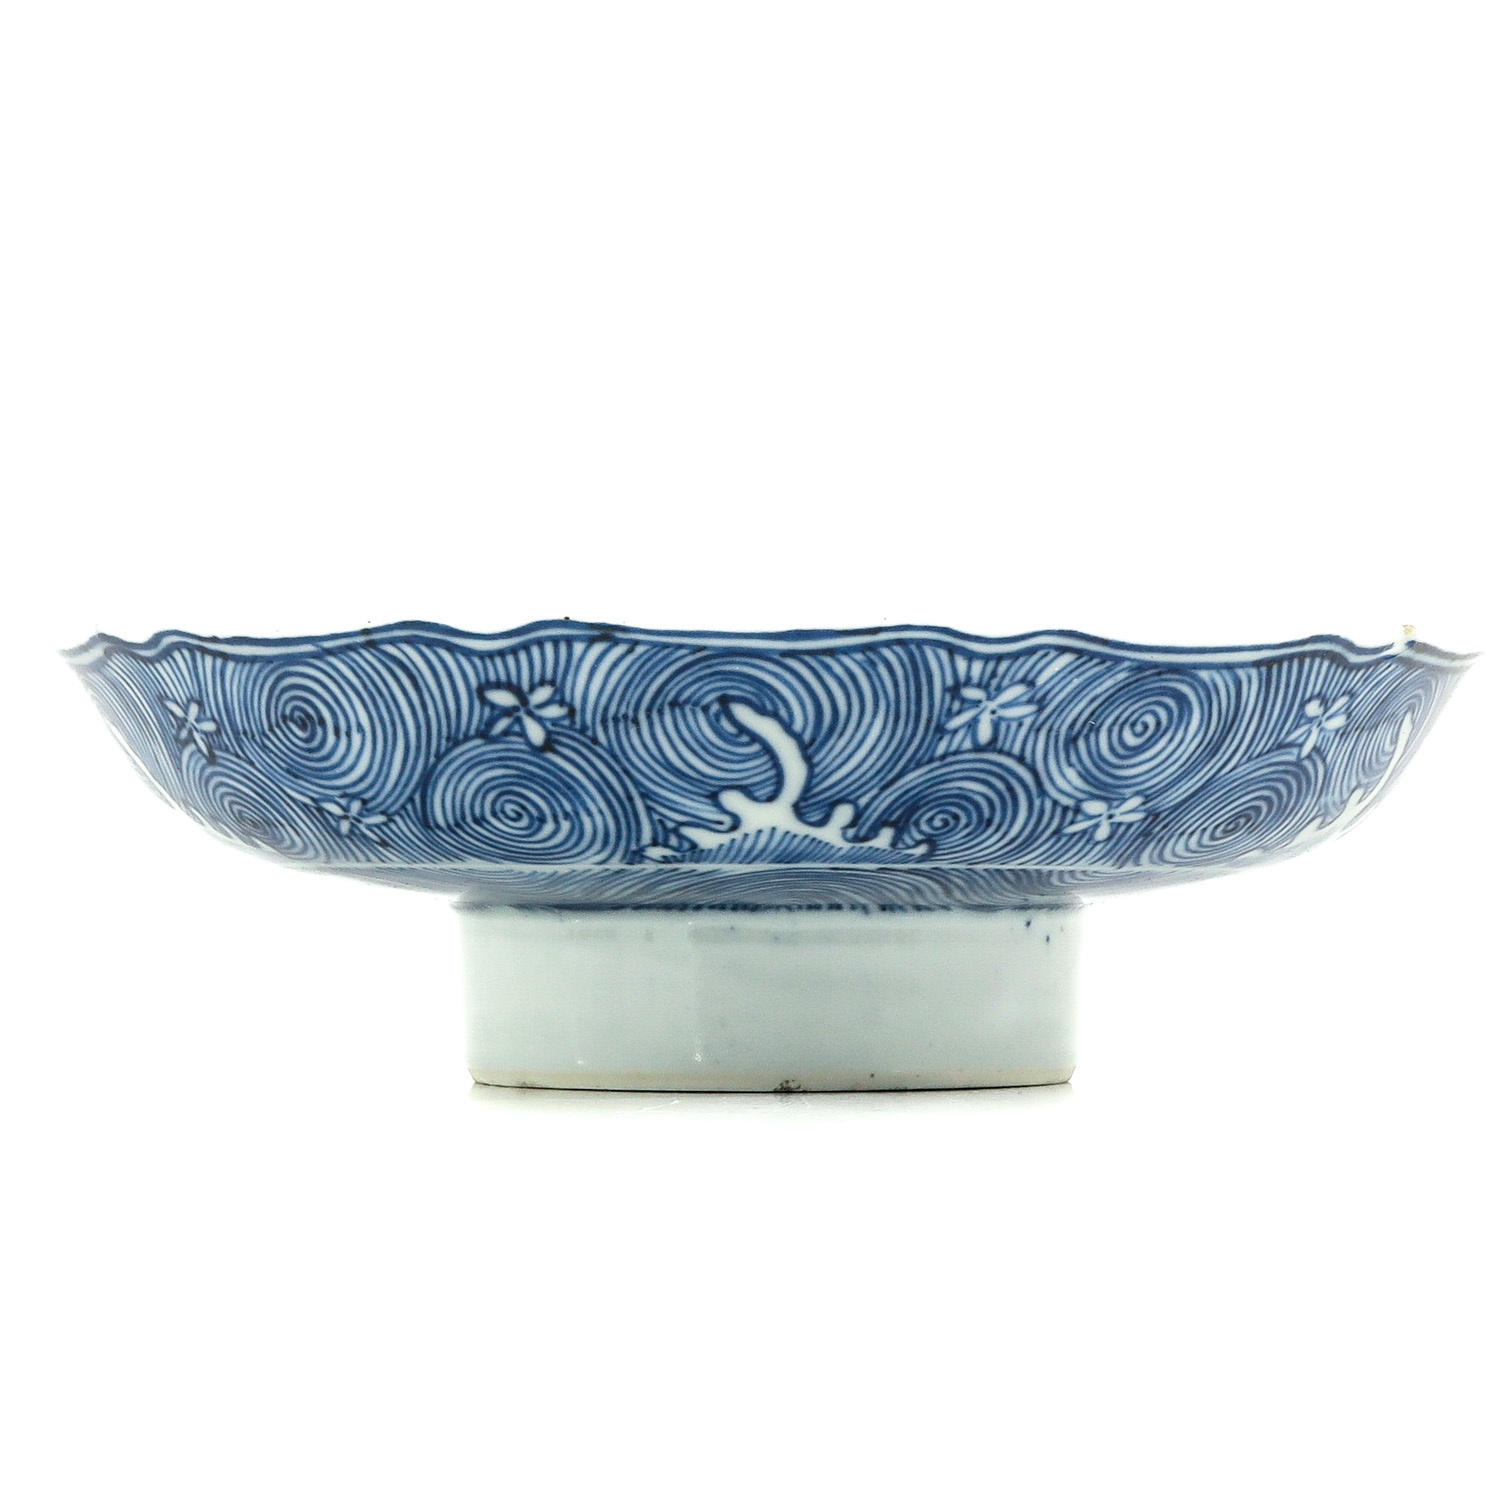 A Blue and White Stem Bowl - Image 4 of 10